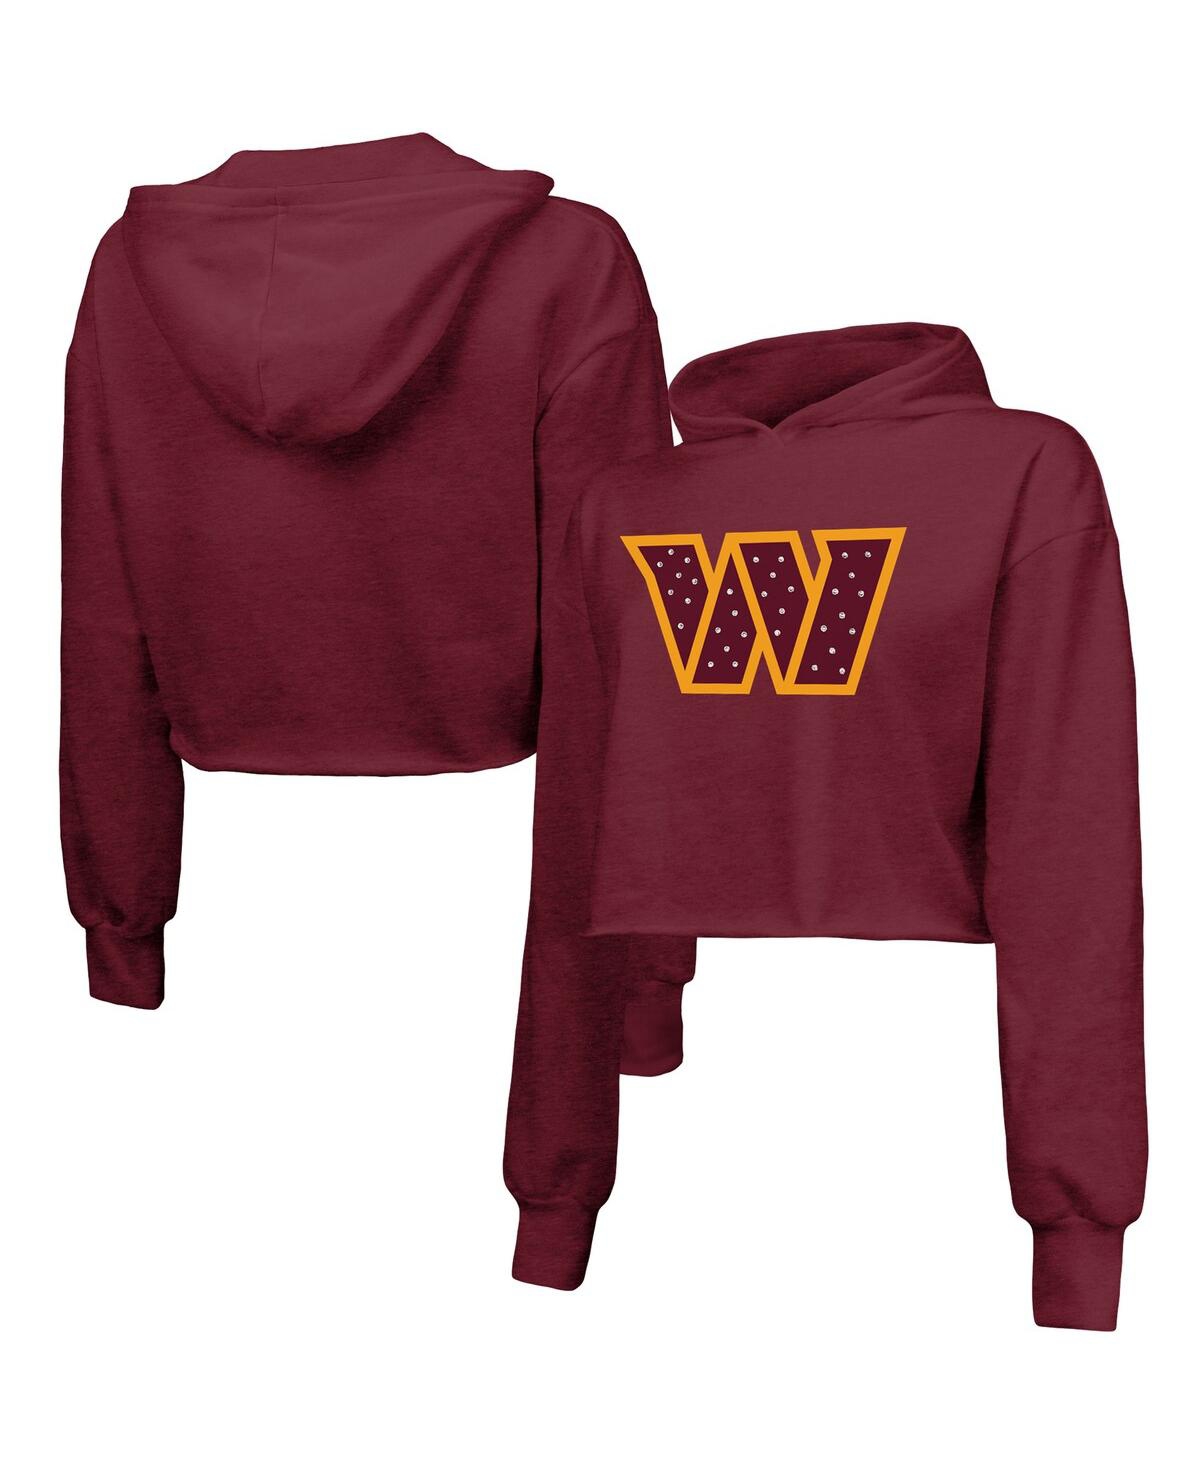 MAJESTIC WOMEN'S MAJESTIC THREADS BURGUNDY WASHINGTON COMMANDERS BLING TRI-BLEND CROPPED PULLOVER HOODIE